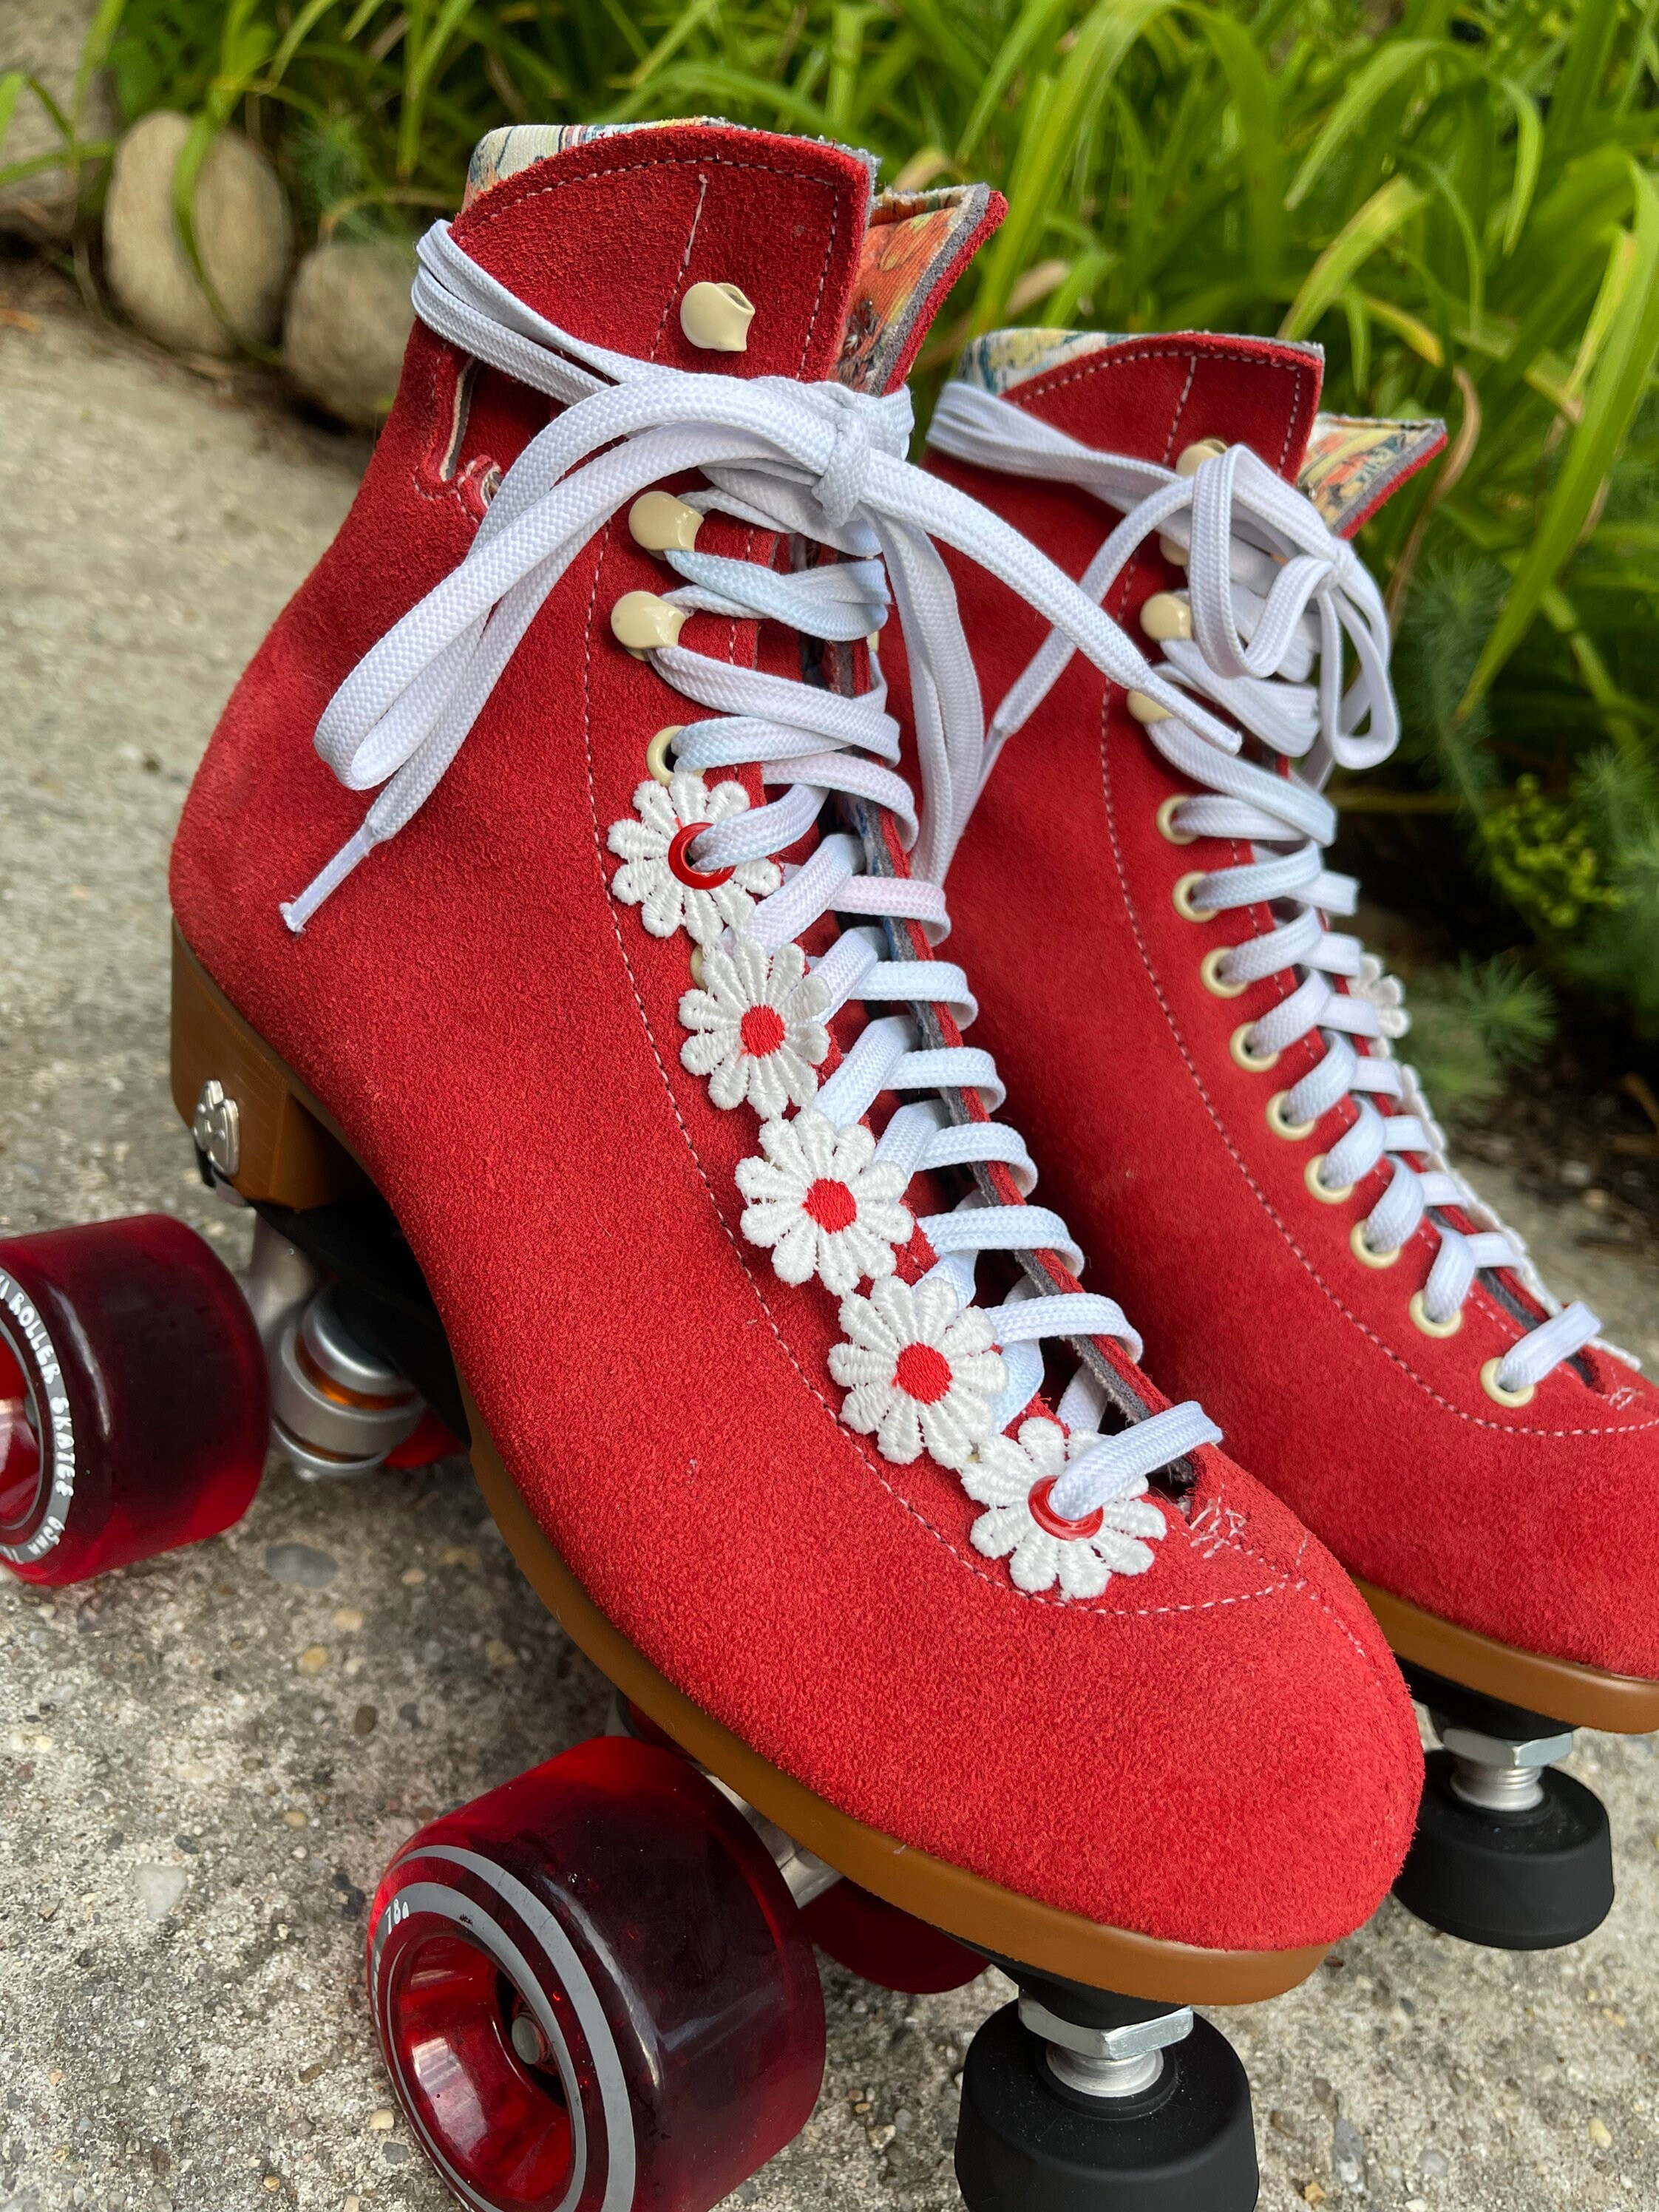 Roller Skate Accessories Daisies 1 PAIR of Daisies 2 Chains Total Eyelet  Flower Shoe Lace the Original DAISY CHAINS ™ 